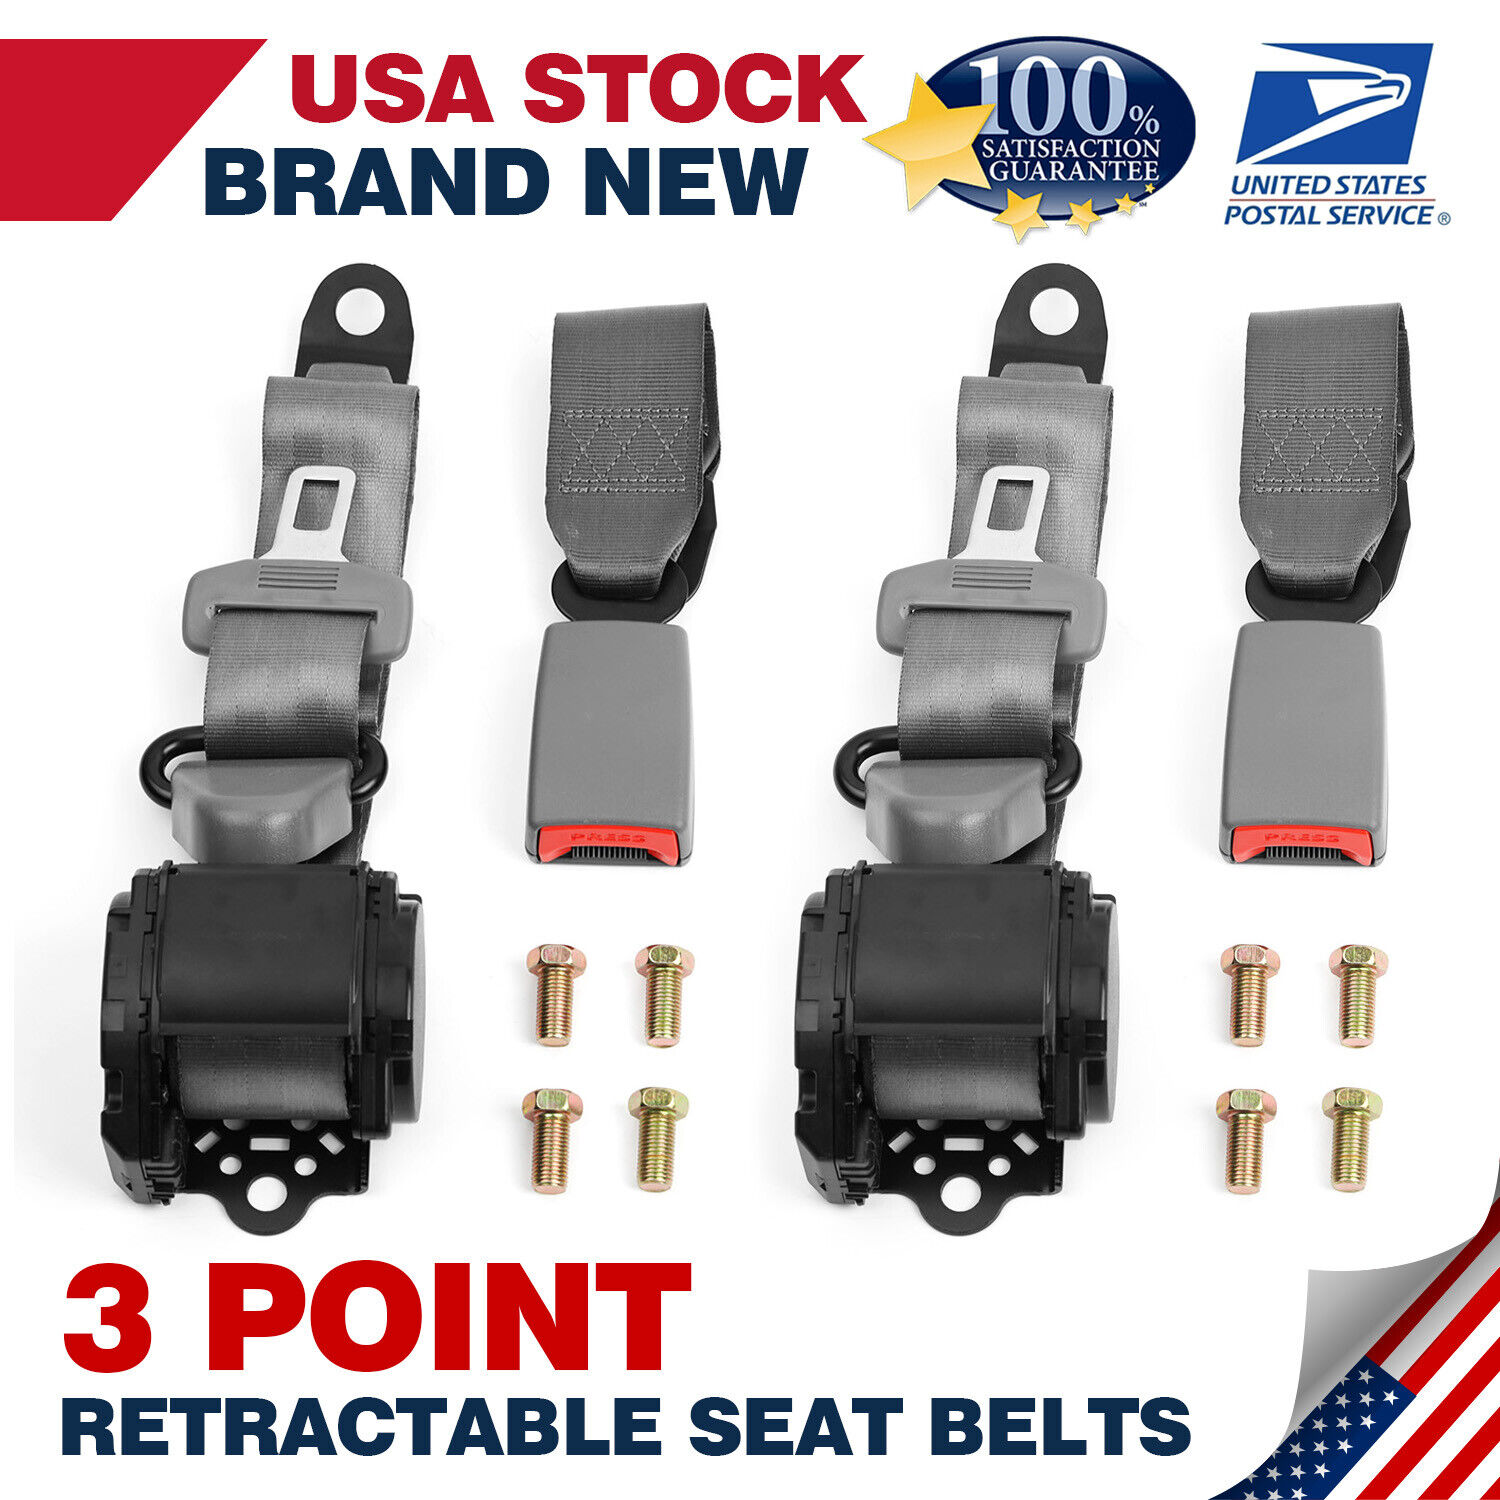 Two Universal Lap Seat Belt 3-Point Adjustable Retractable Car Gray Seat